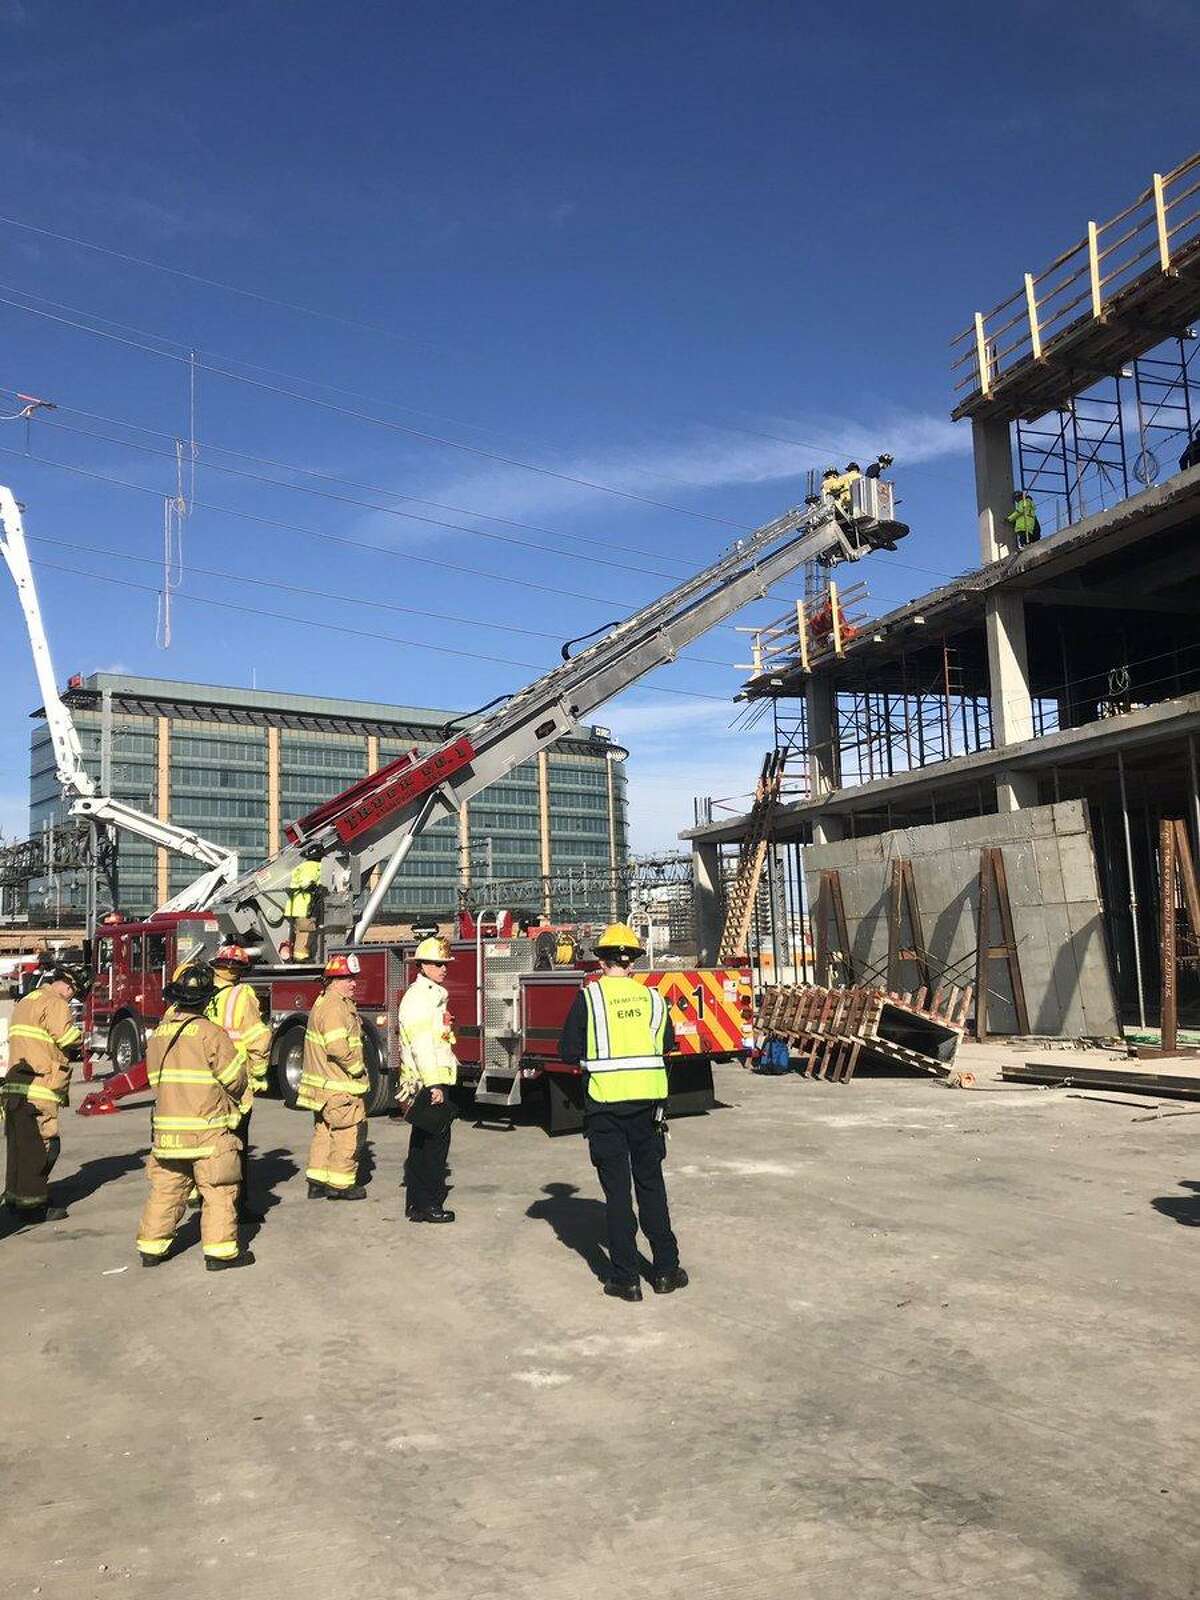 A worker was injured Thursday at a Stamford construction site.